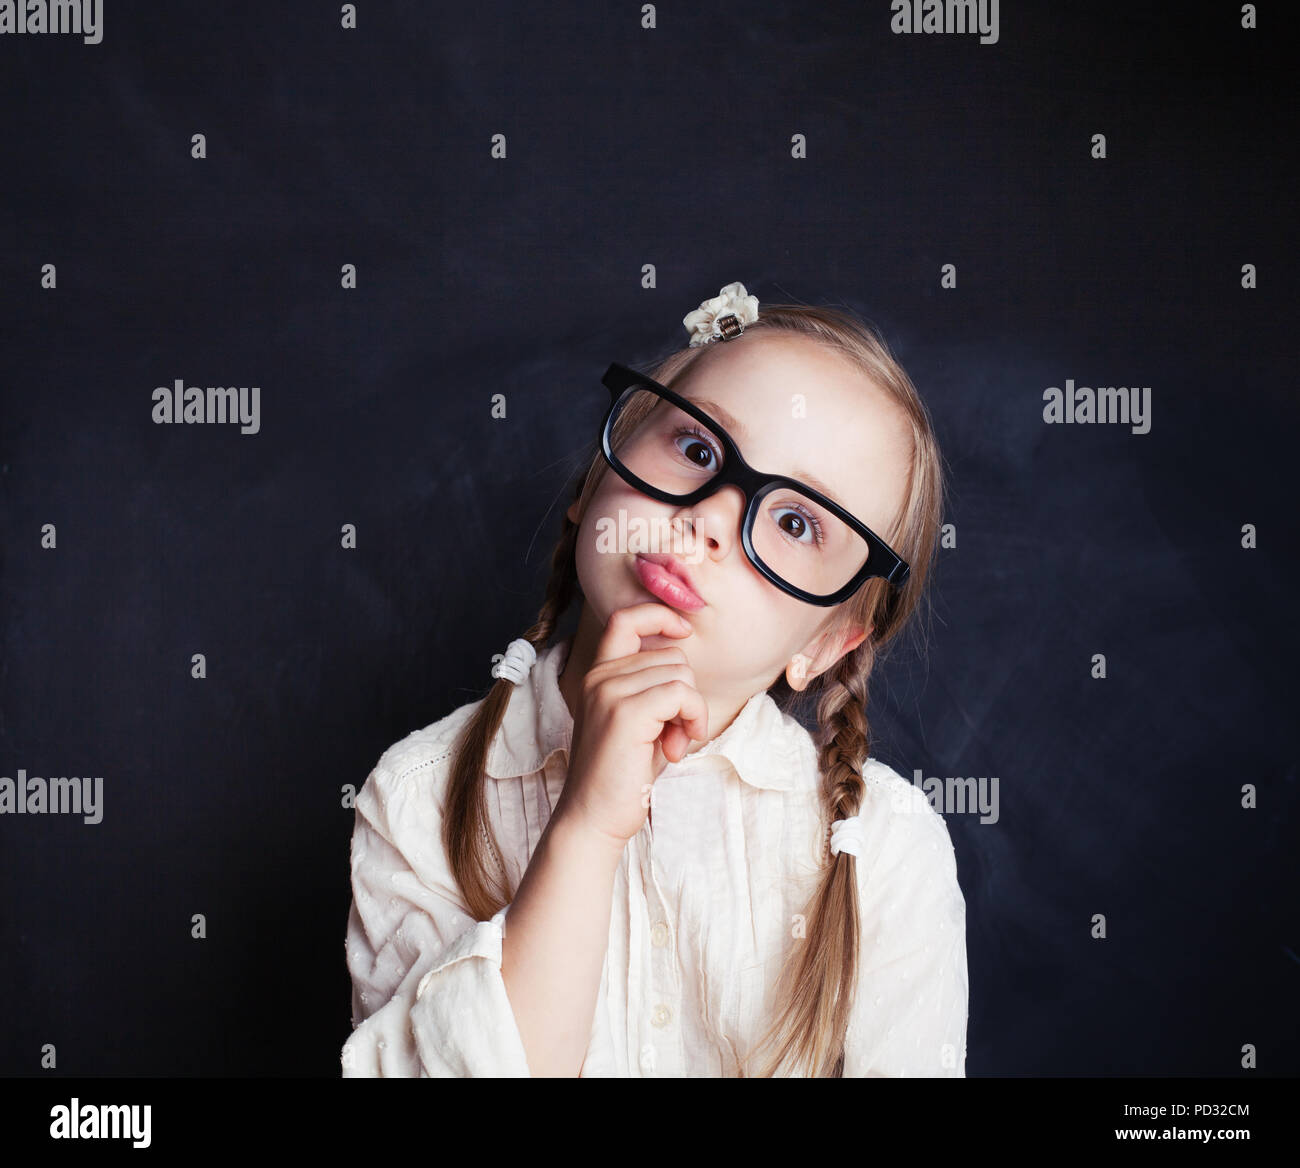 Сurious child thinking. Funny little girl in glasses on chalk board background with copy space. Back to school, kid creativity and brainstorming conce Stock Photo